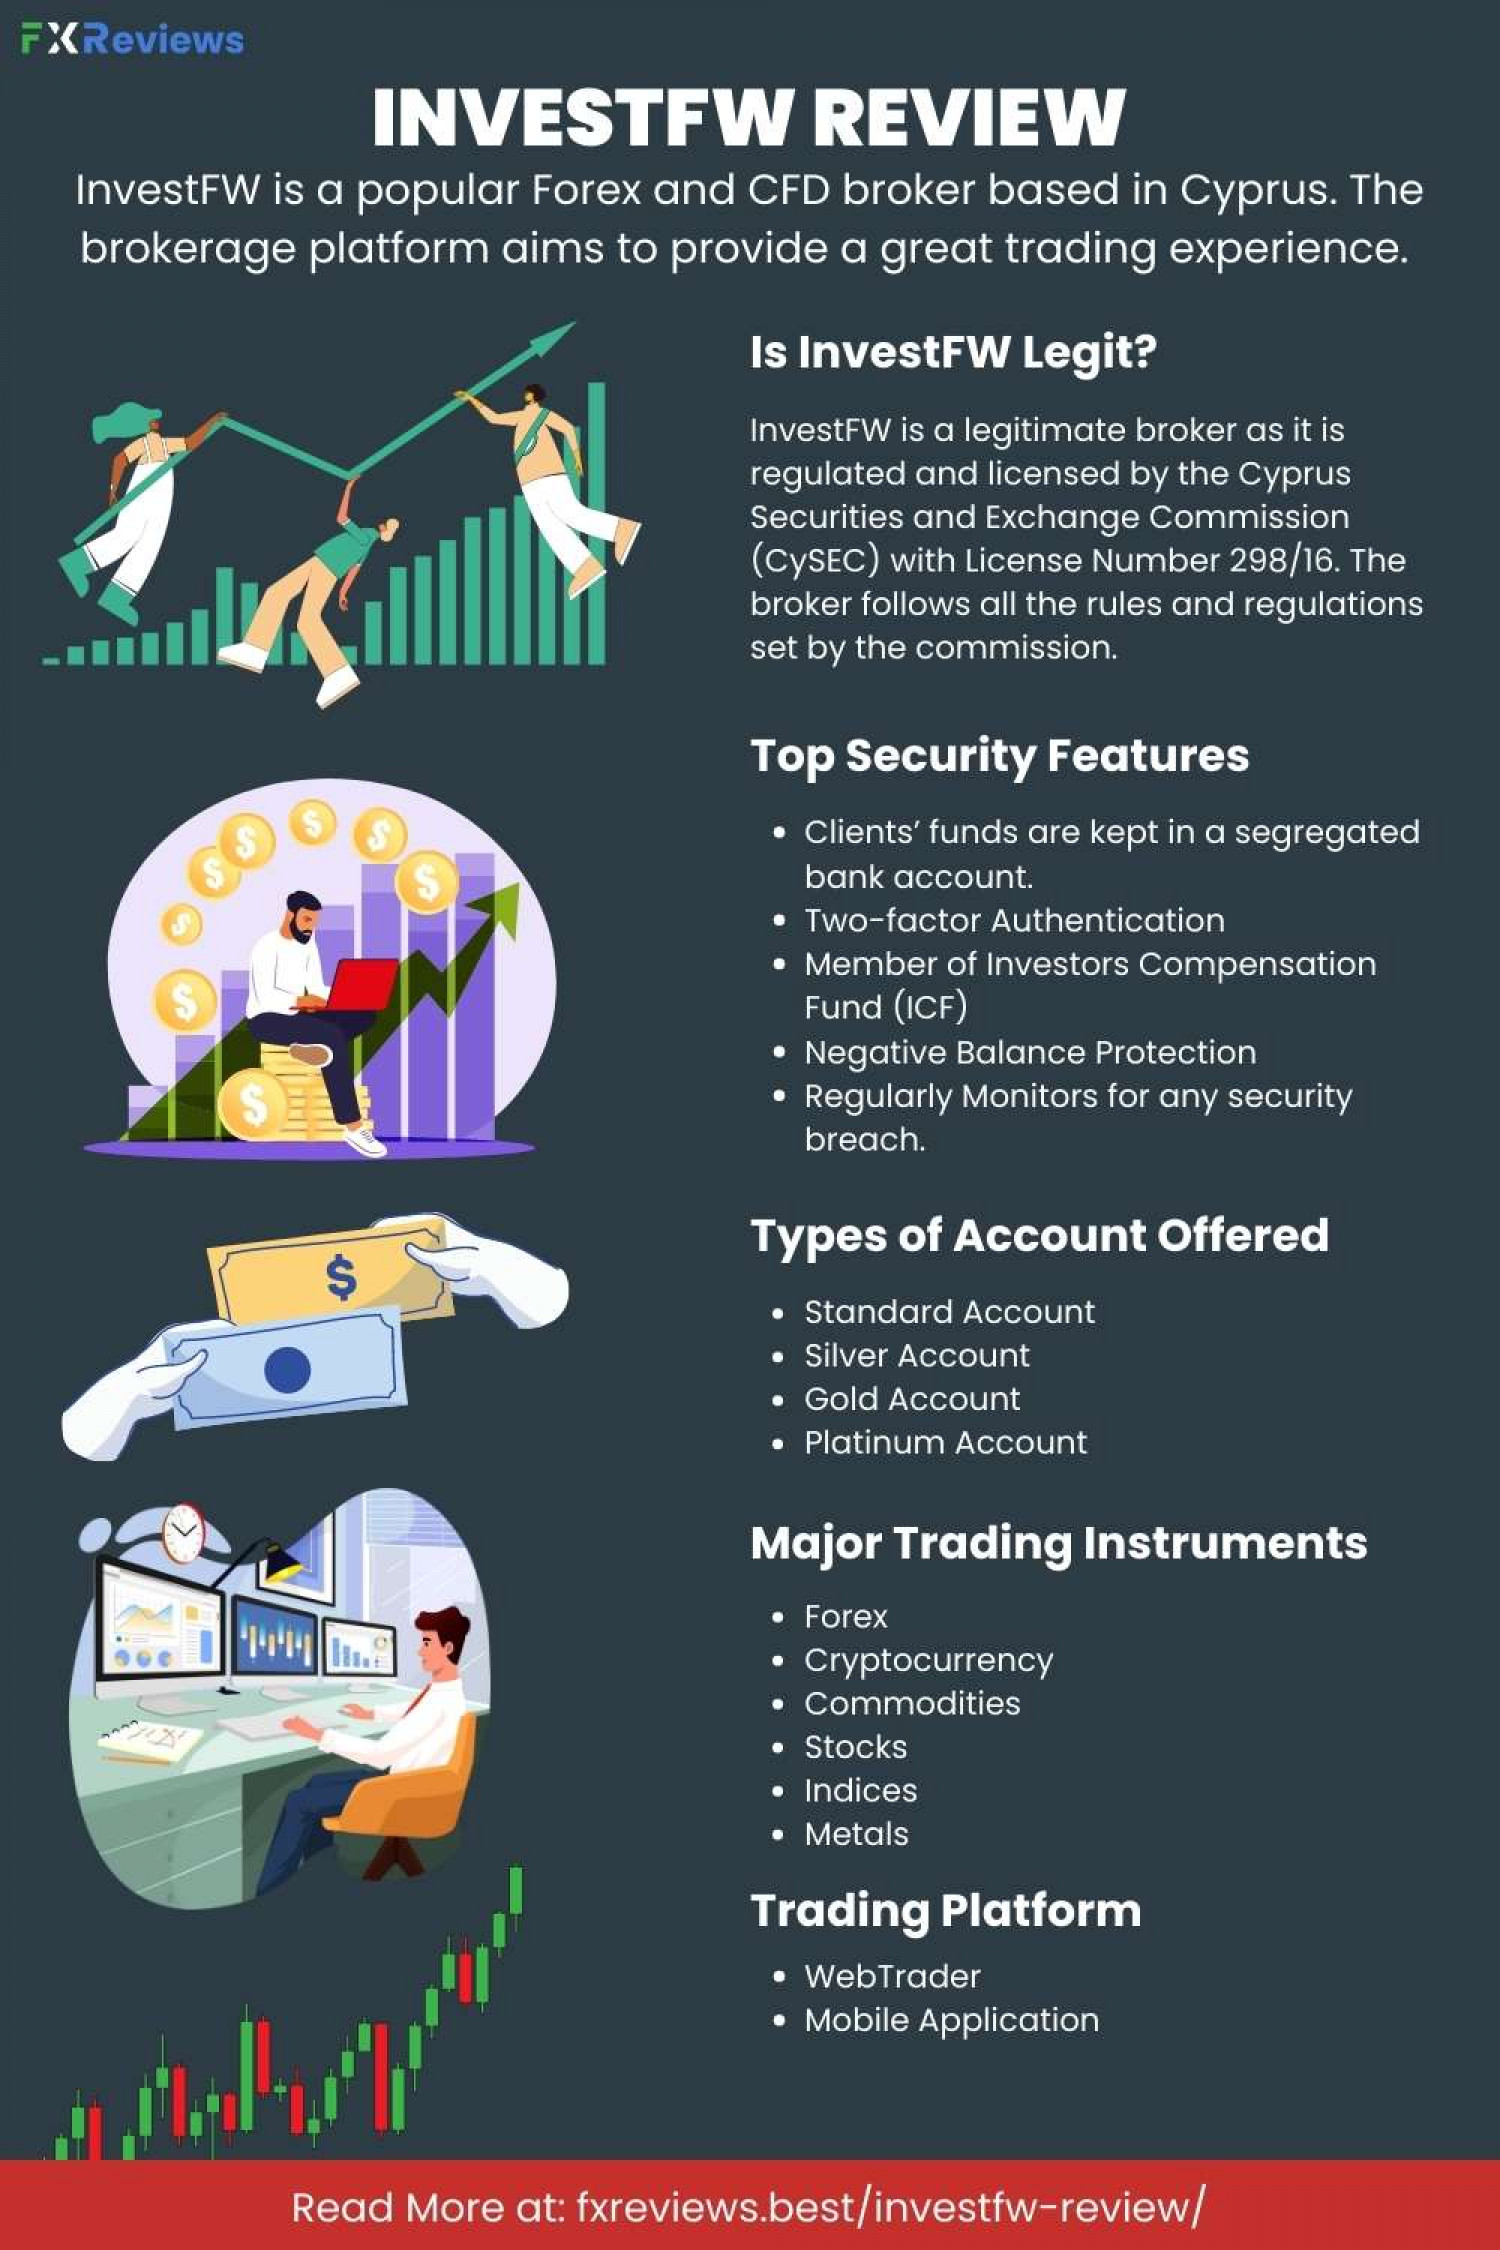 InvestFW Review Infographic